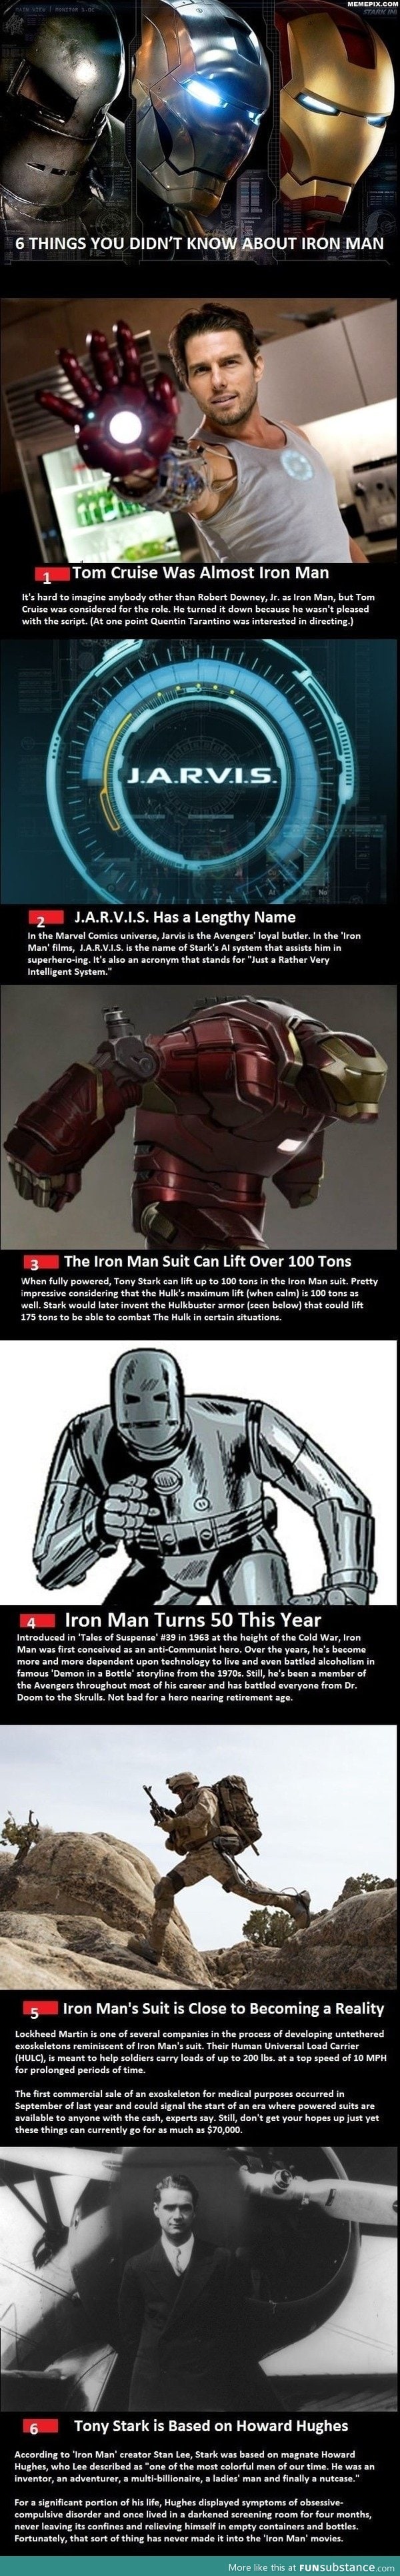 Things you didn't know about iron man